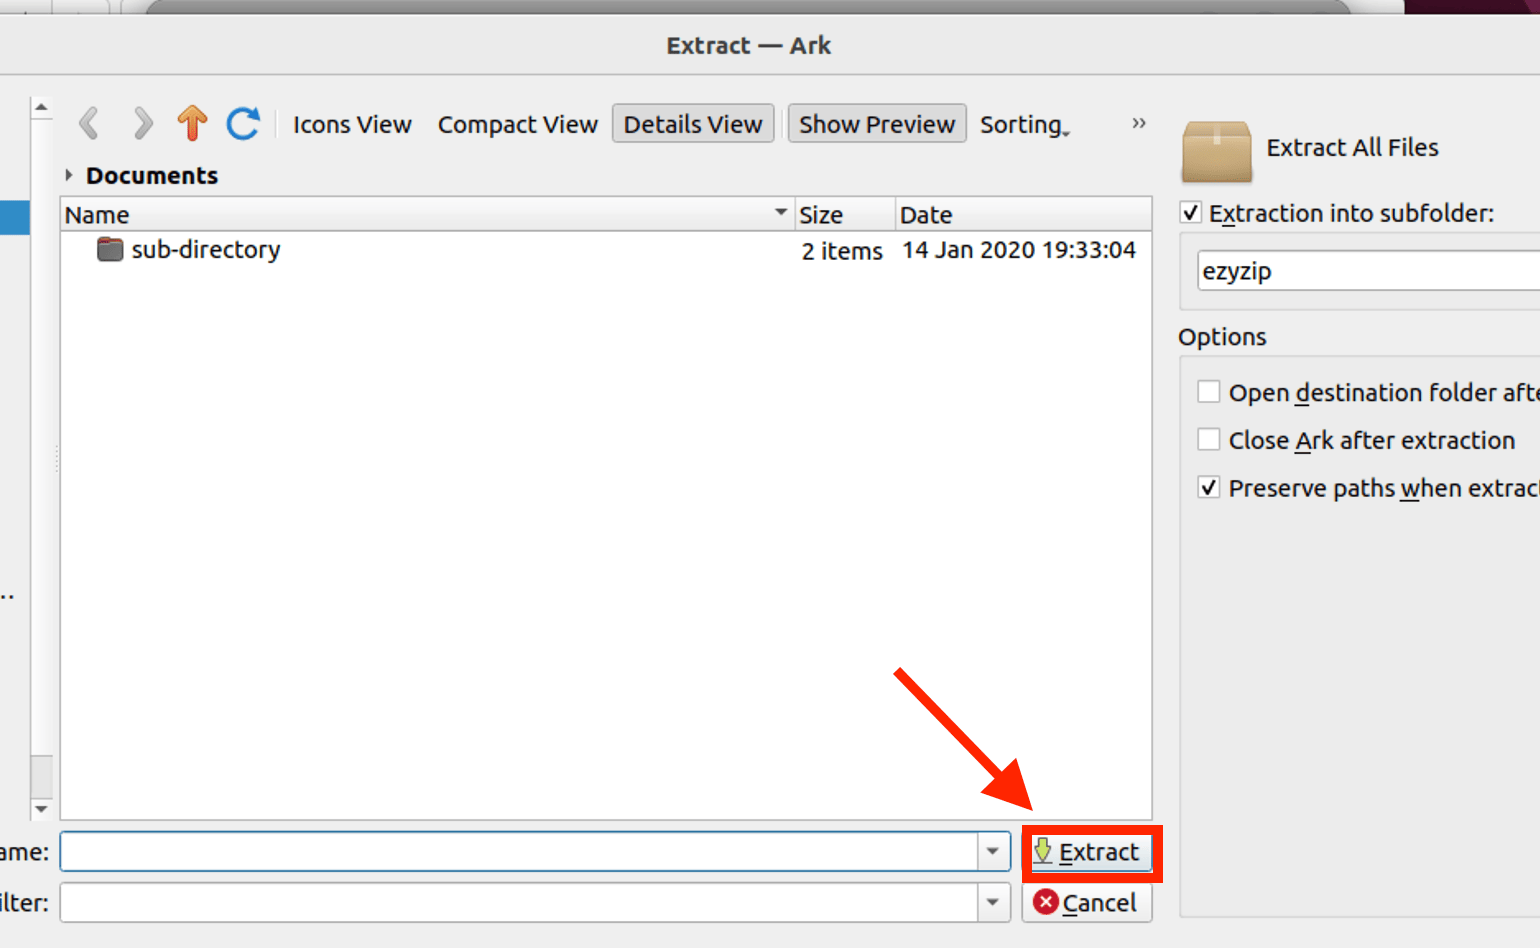 How To Extract 7Z Files Using Ark: Step 4